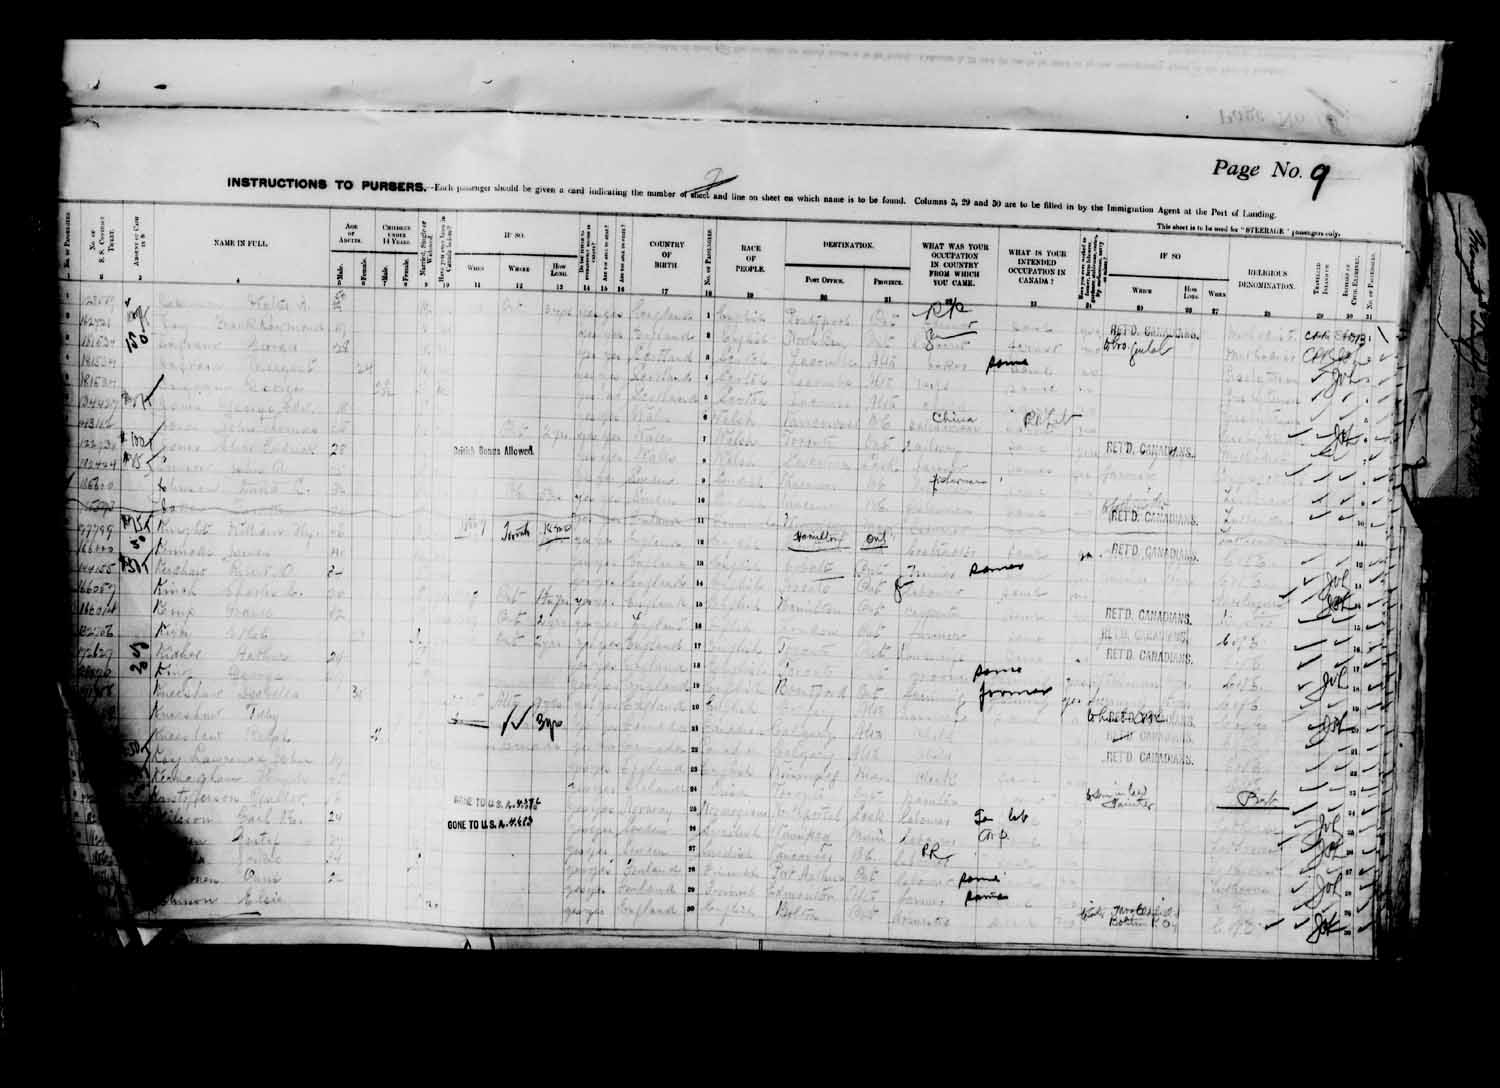 Digitized page of Passenger Lists for Image No.: e003627197